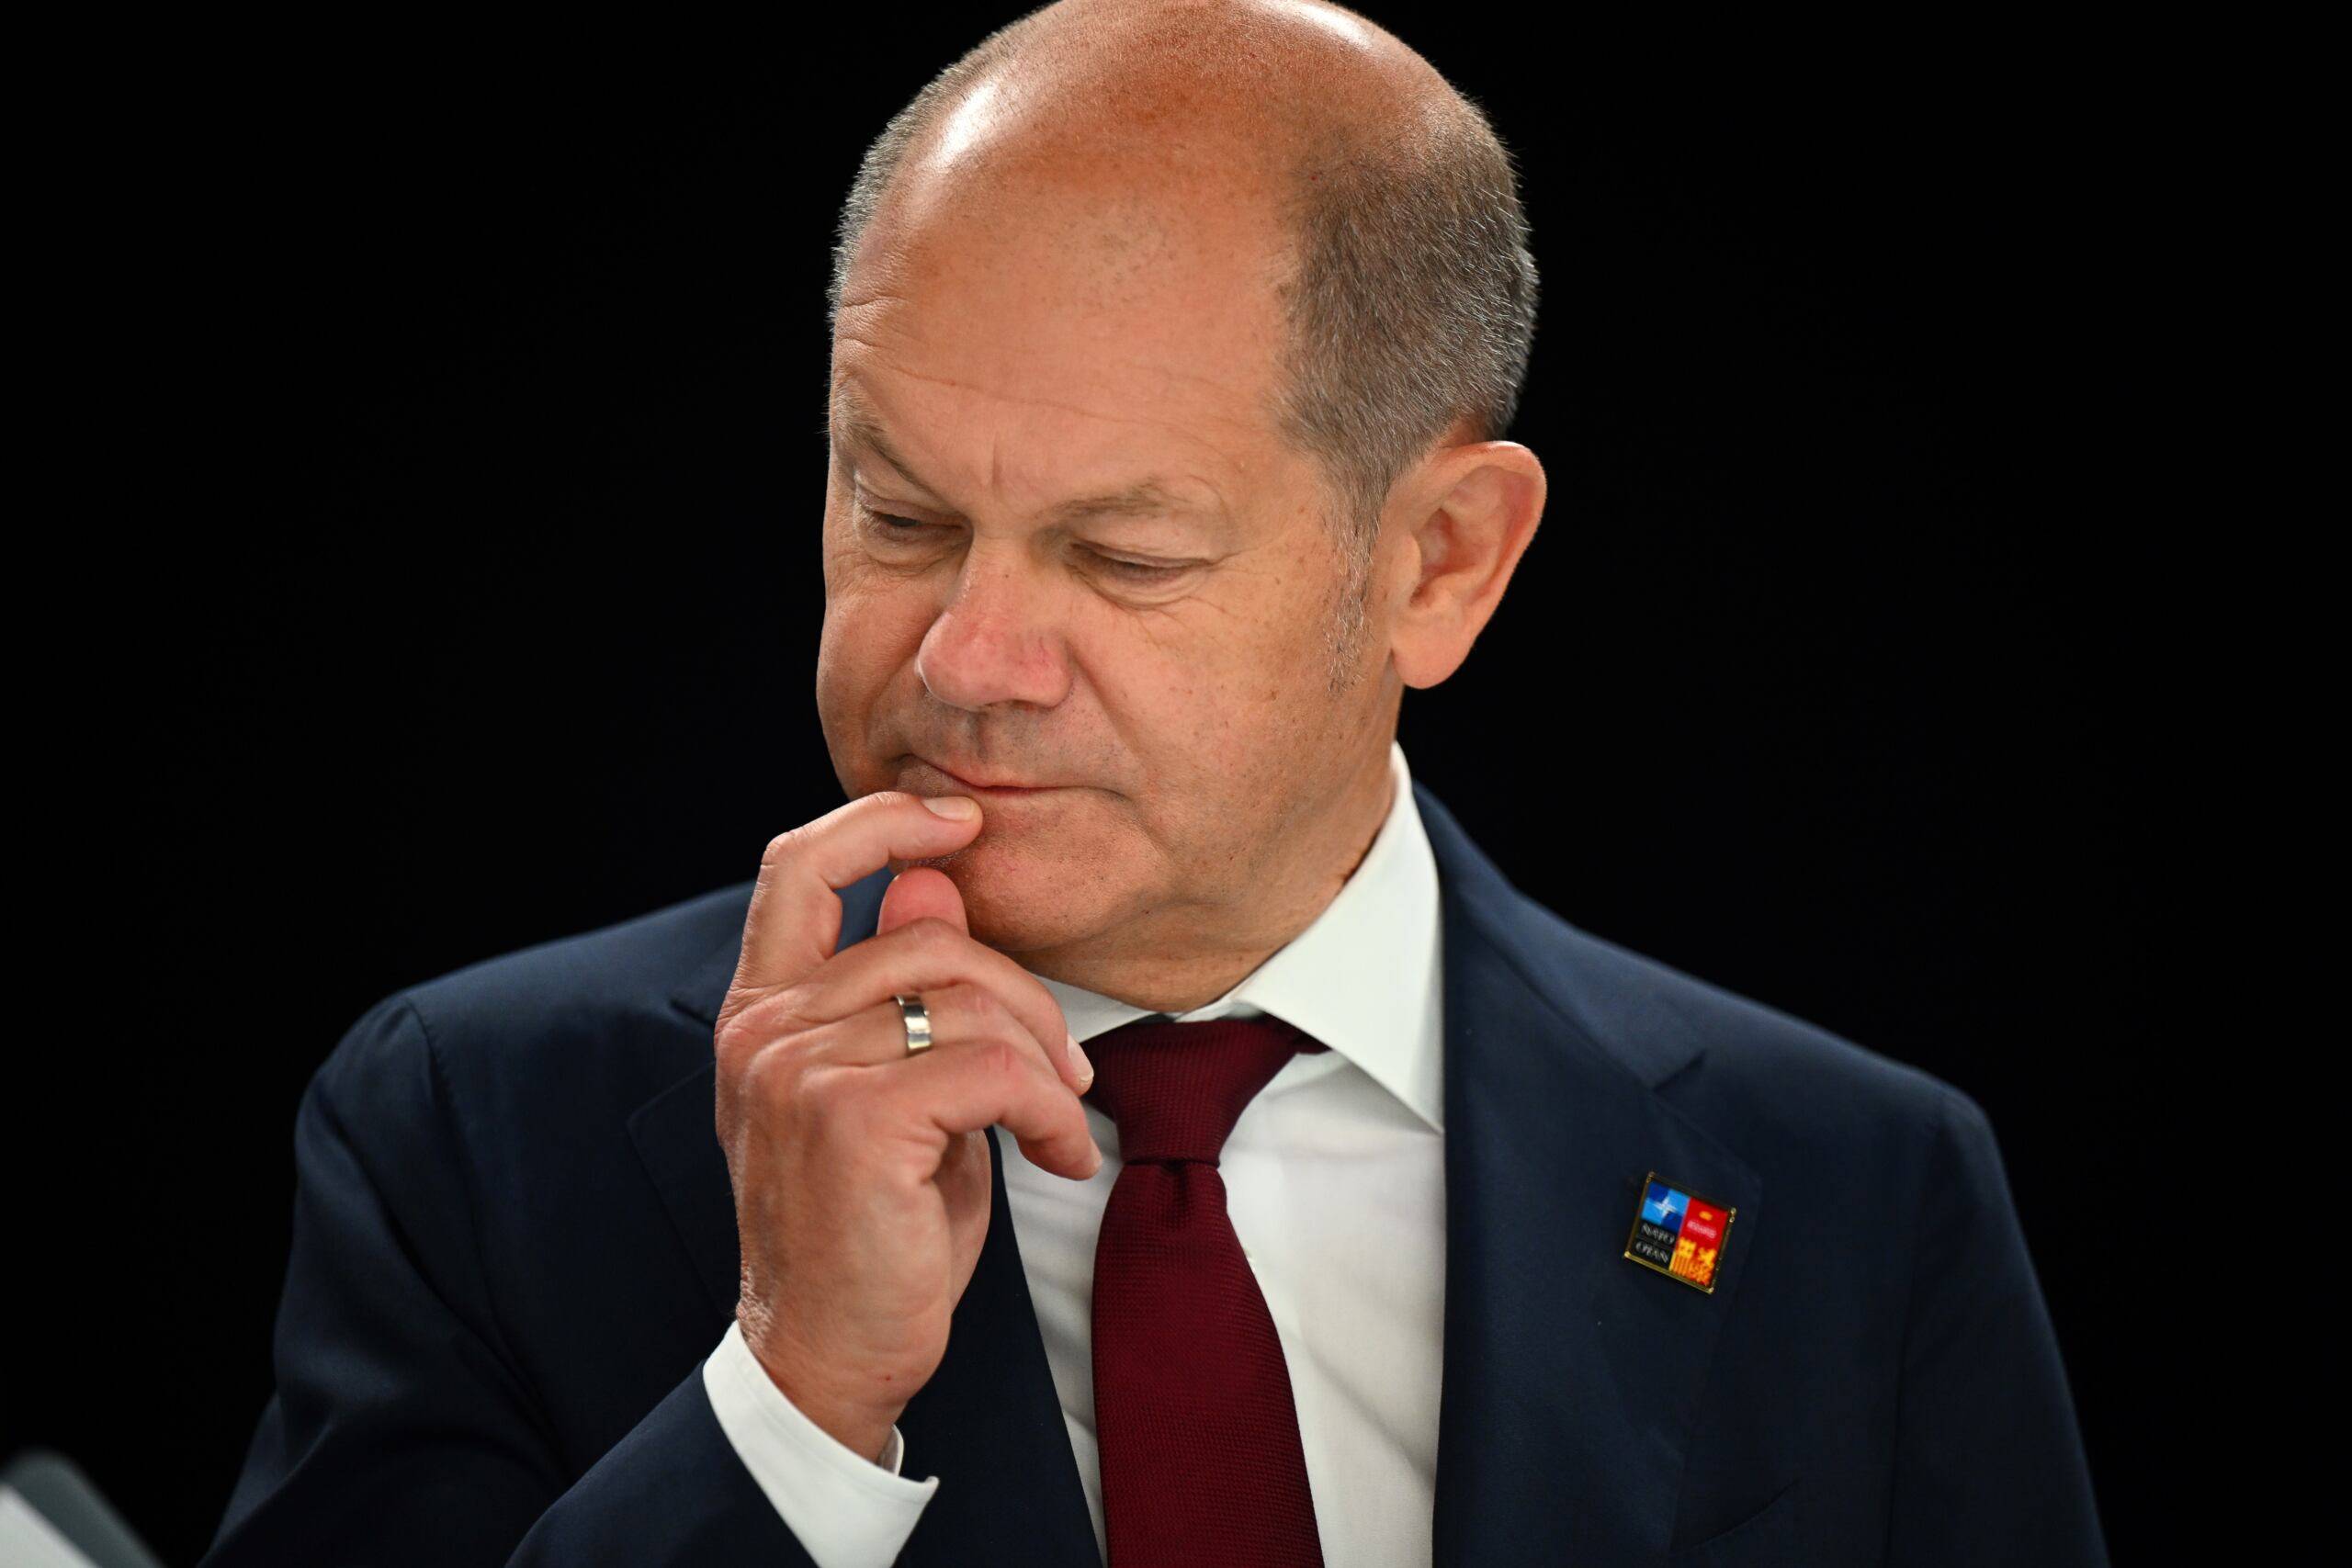 German Chancellor Olaf Scholz gestures ahead of a meeting of The North Atlantic Council during the NATO summit at the Ifema congress centre in Madrid, on June 30, 2022. (Photo by GABRIEL BOUYS / AFP)